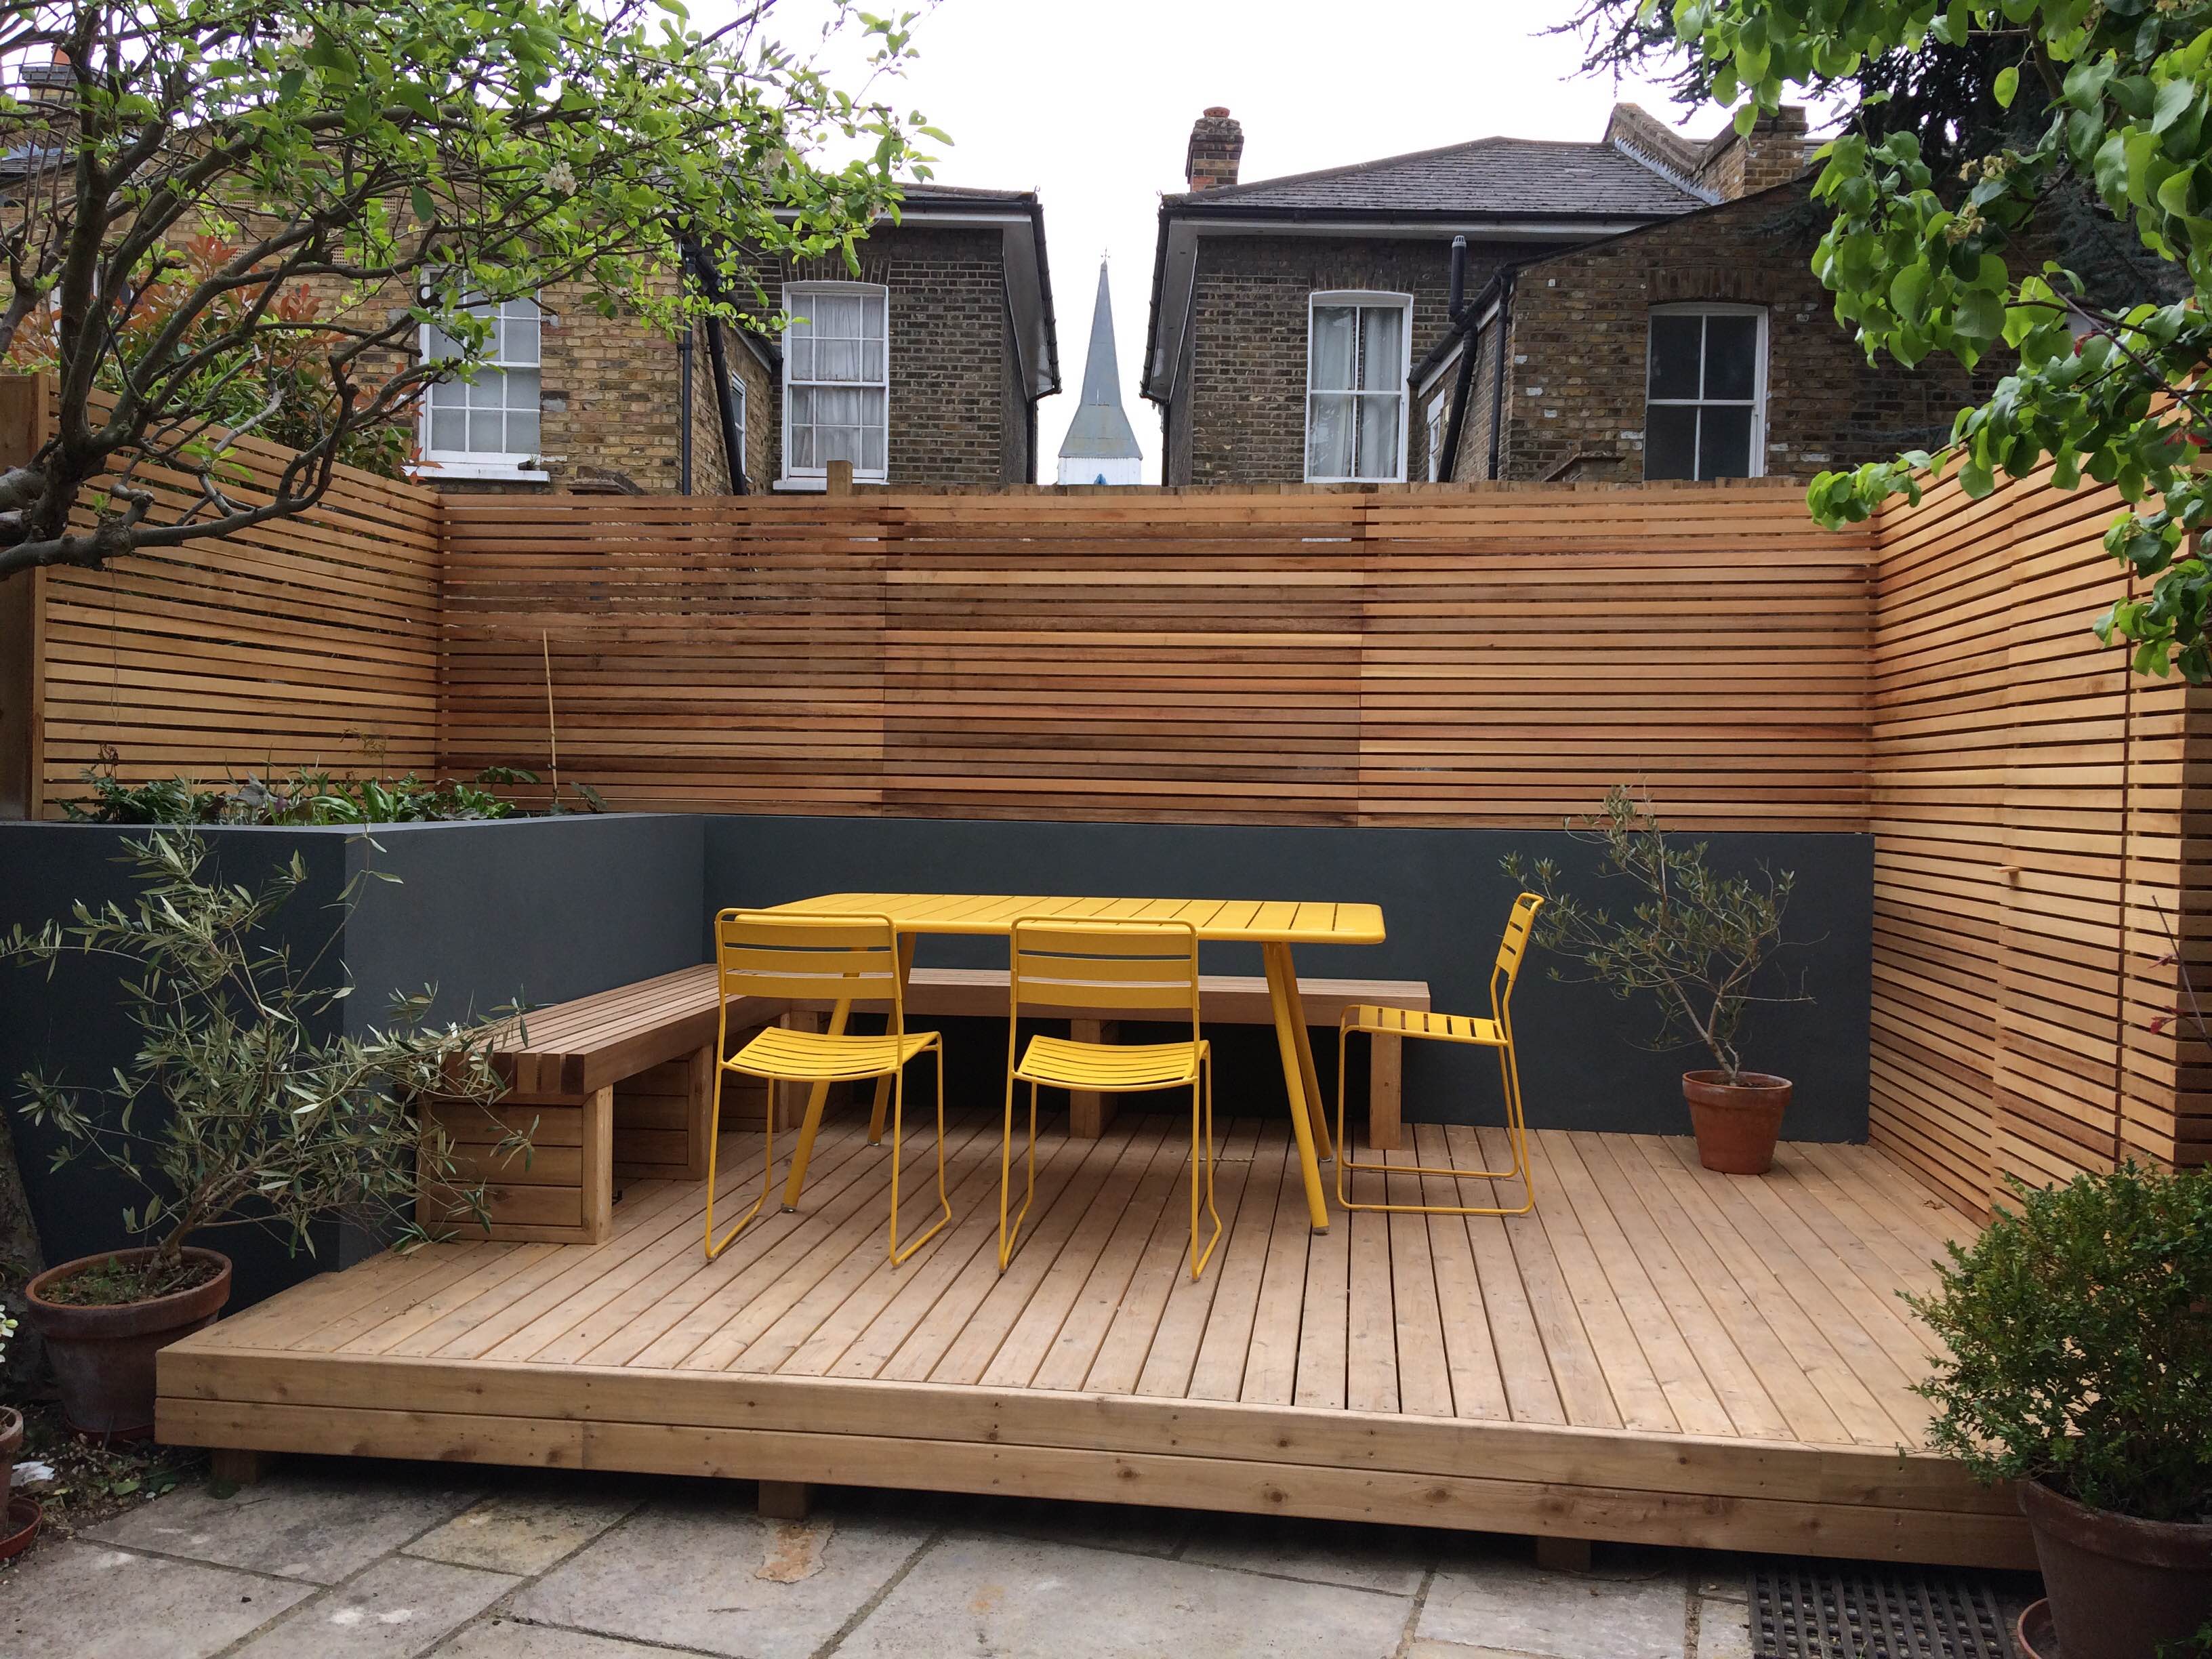 </p> <p>Find your ideal home design pro on designfor-me.com - get matched and see who's interested in your home project. Click image to see more inspiration from our design pros</p> <p>Design by Sam, garden designer from Haringey, London</p> <p> #gardendesign #gardeninspiration #gardenlove #gardenideas #gardens </p> <p>